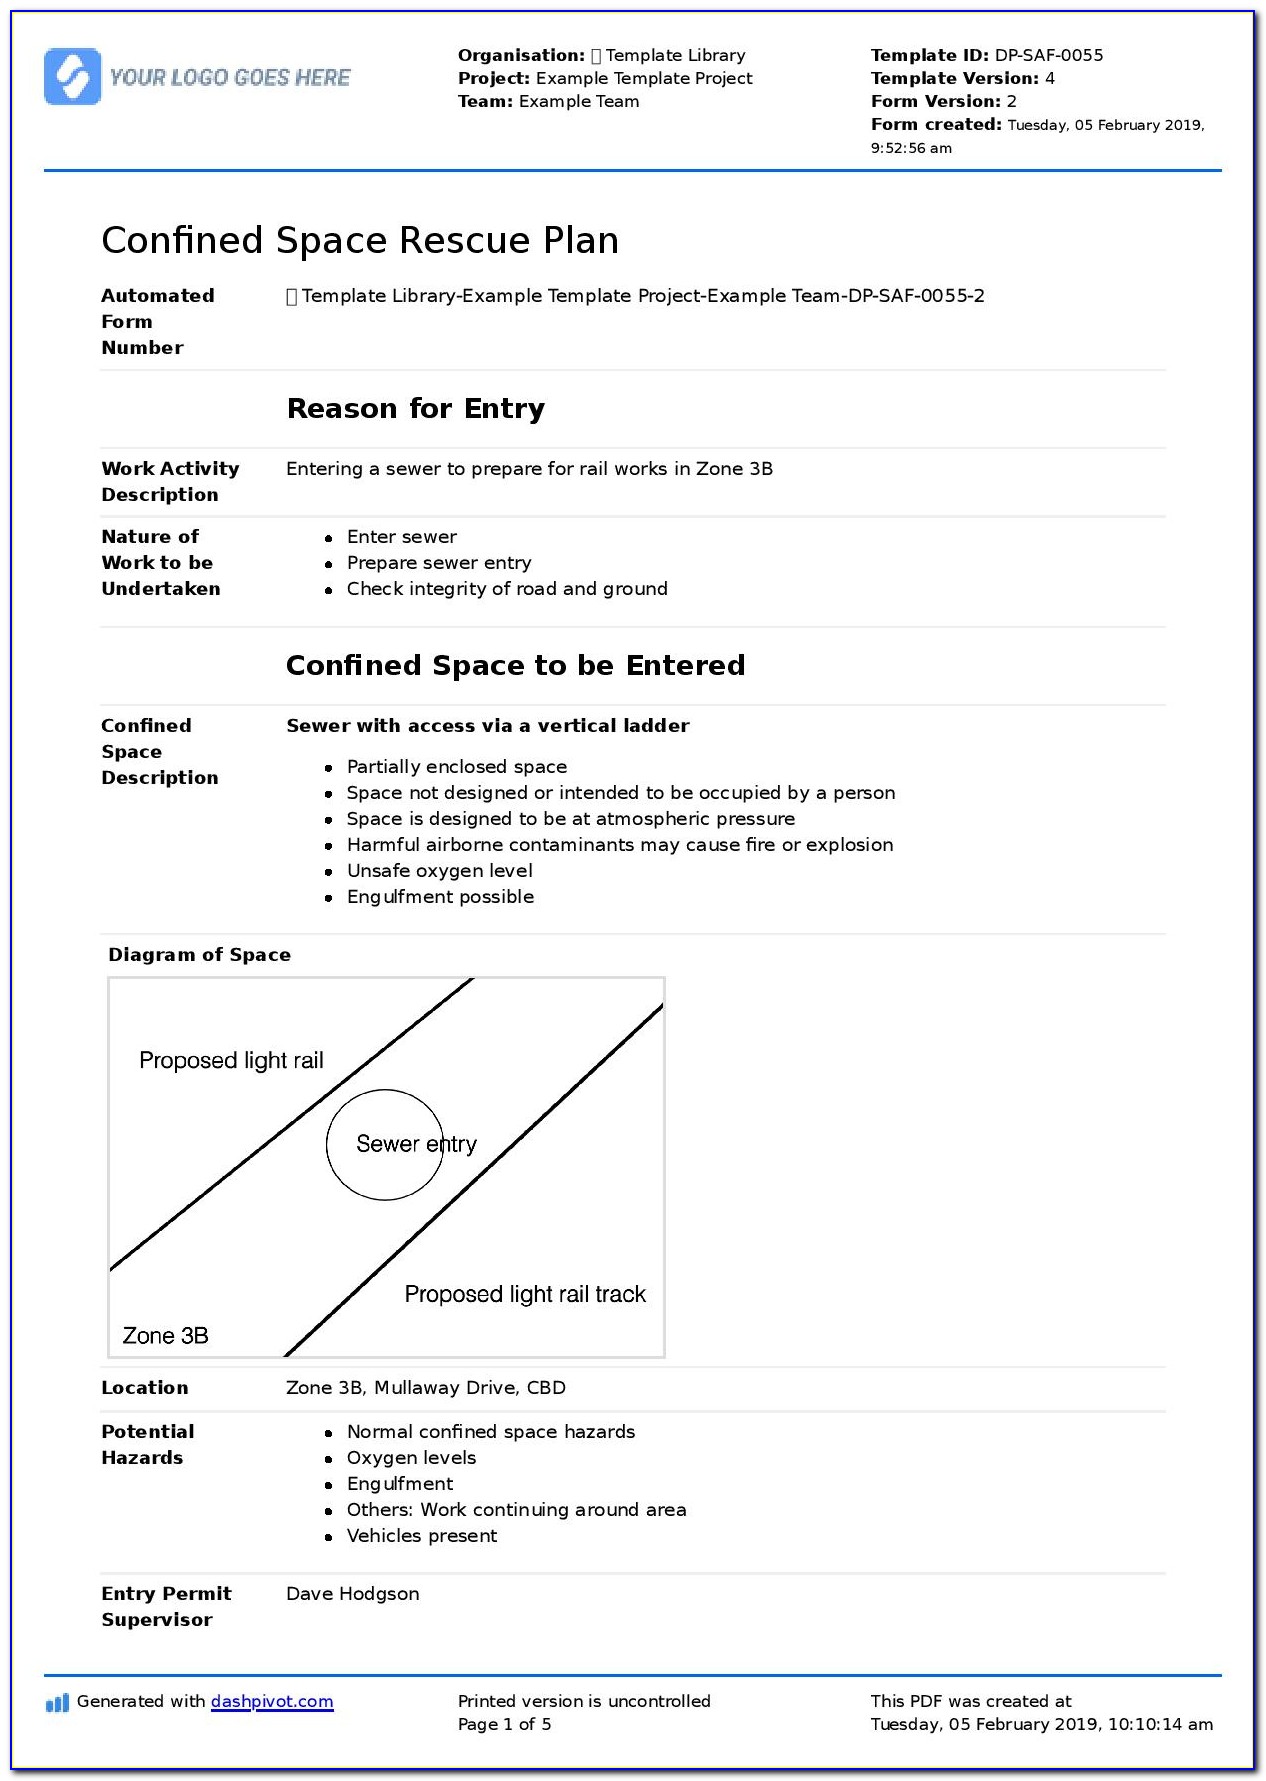 Confined Space Emergency Response Plan Example